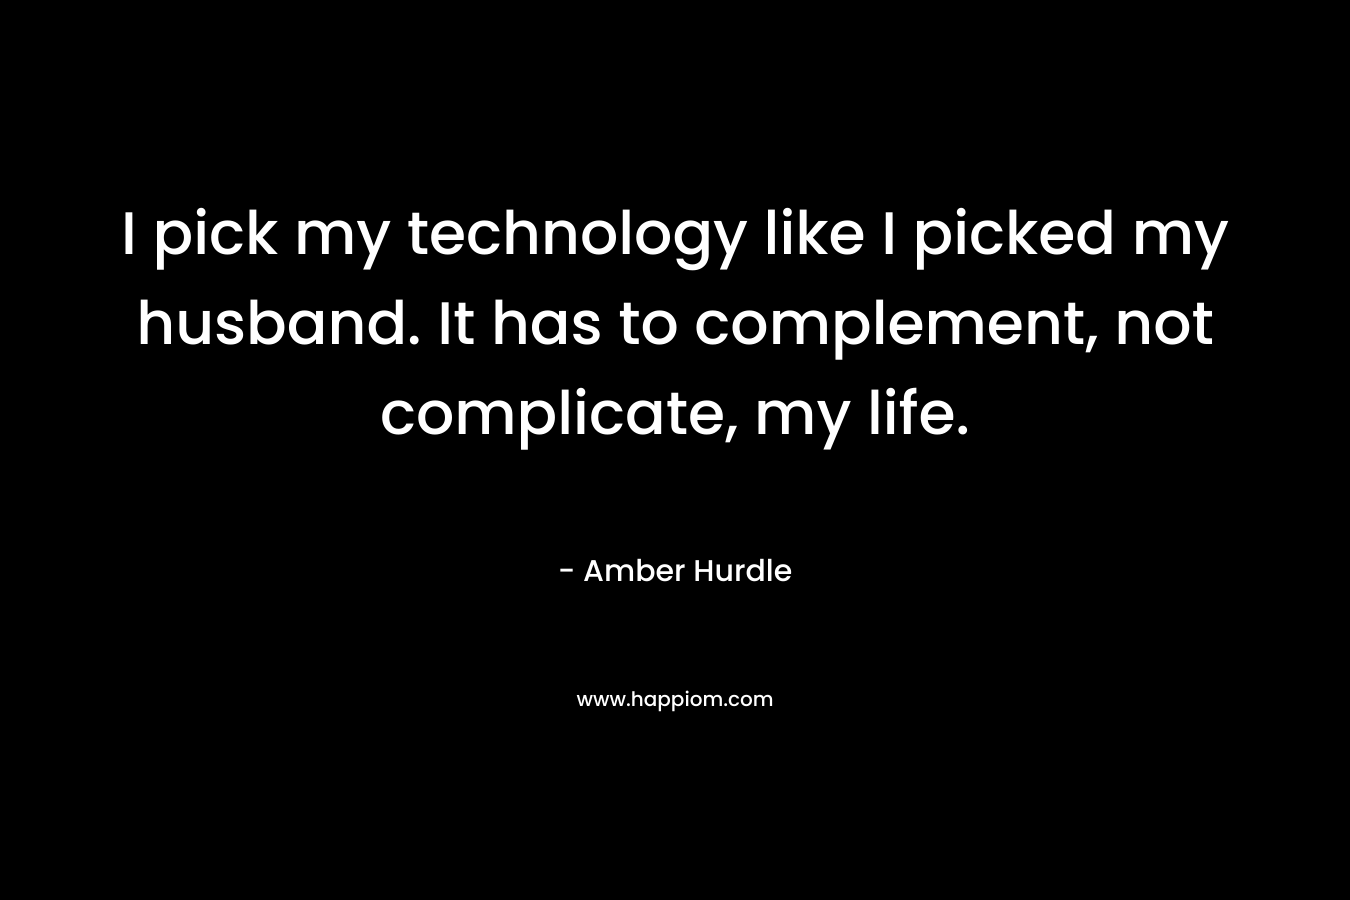 I pick my technology like I picked my husband. It has to complement, not complicate, my life. – Amber Hurdle